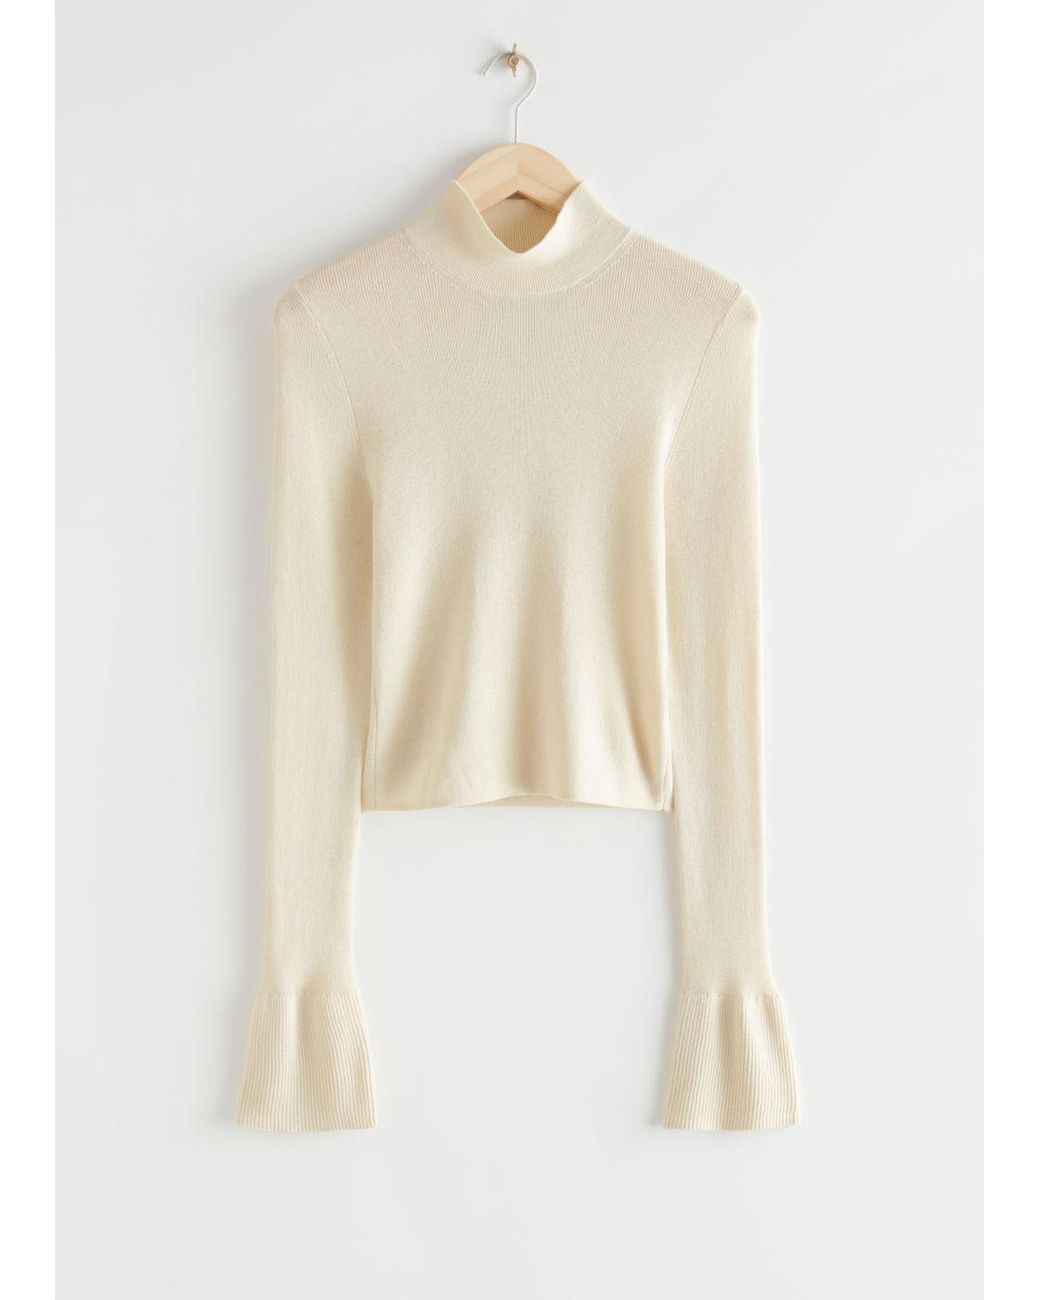 & Other Stories Flare Cuff Rib Knit Top in White | Lyst